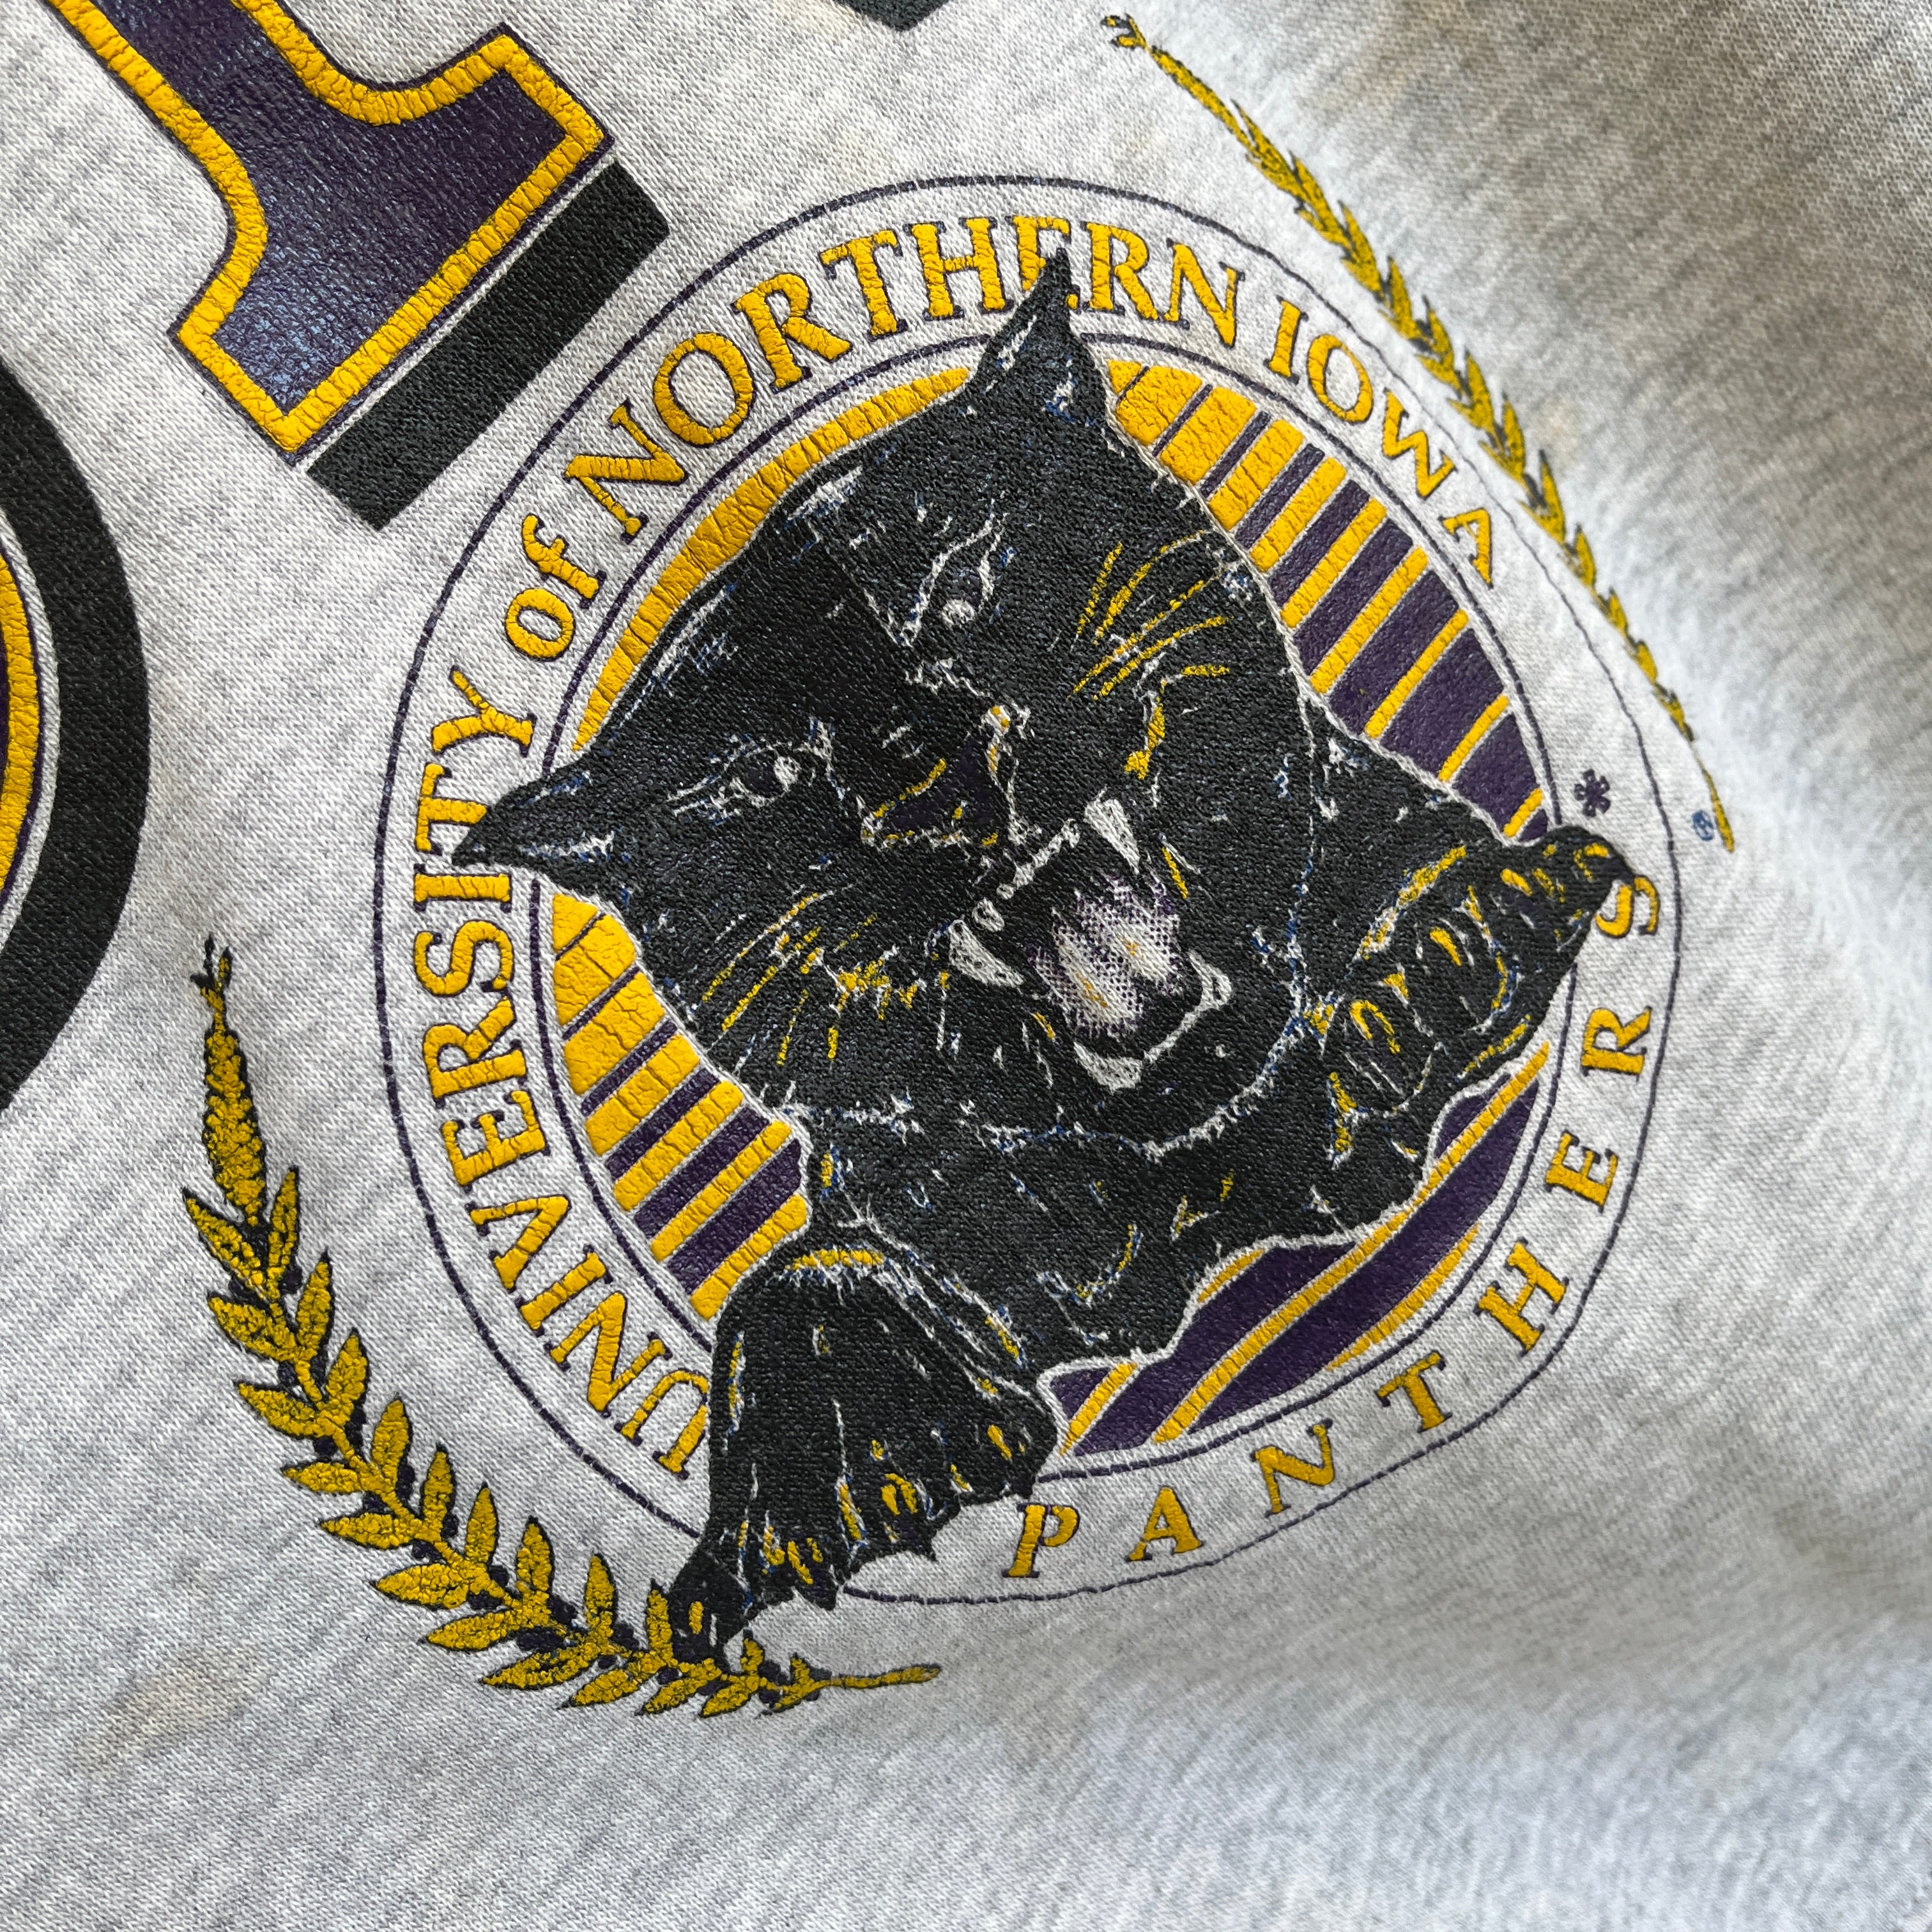 1980s University of Northern Iowa Super Stained and Thrashed Sweatshirt